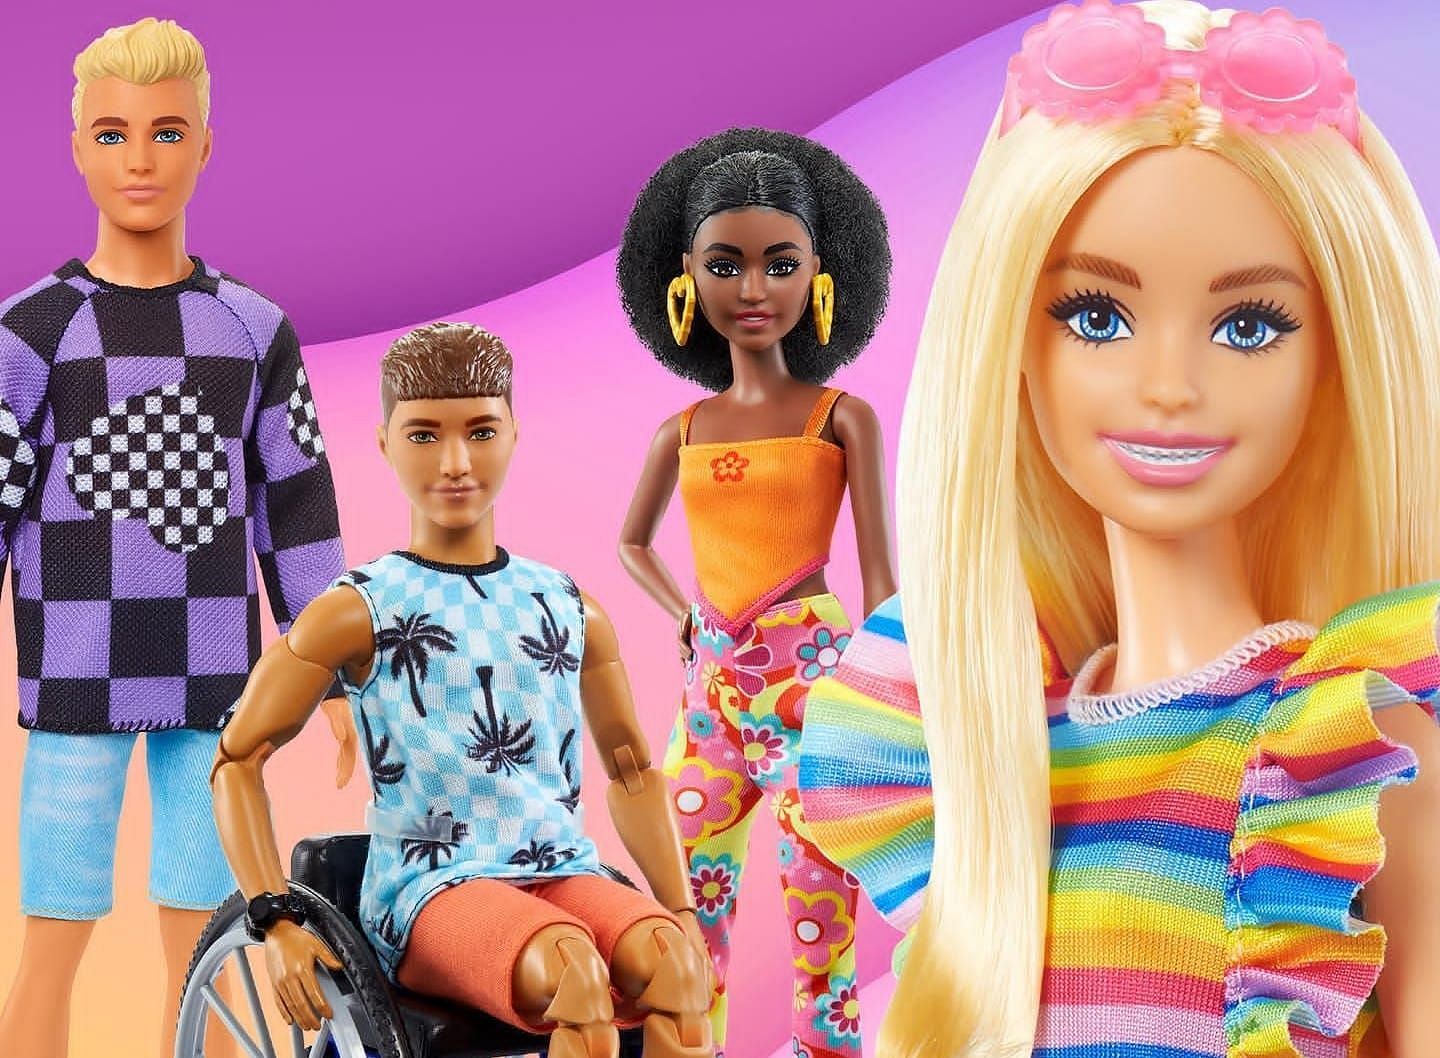 Where to watch all the Barbie movies?